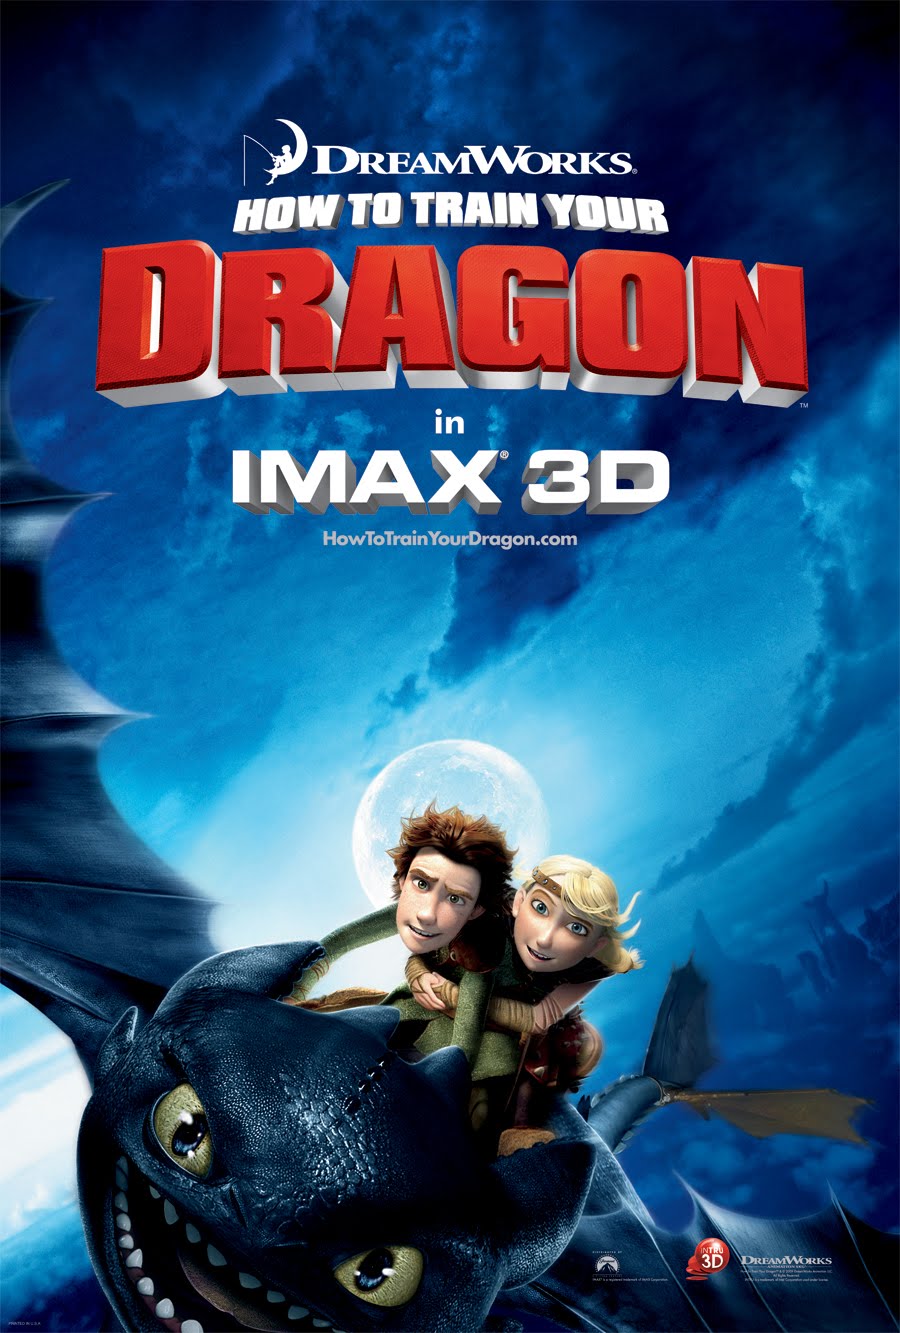 How_to_train_your_dragon_imax_poster.jpg